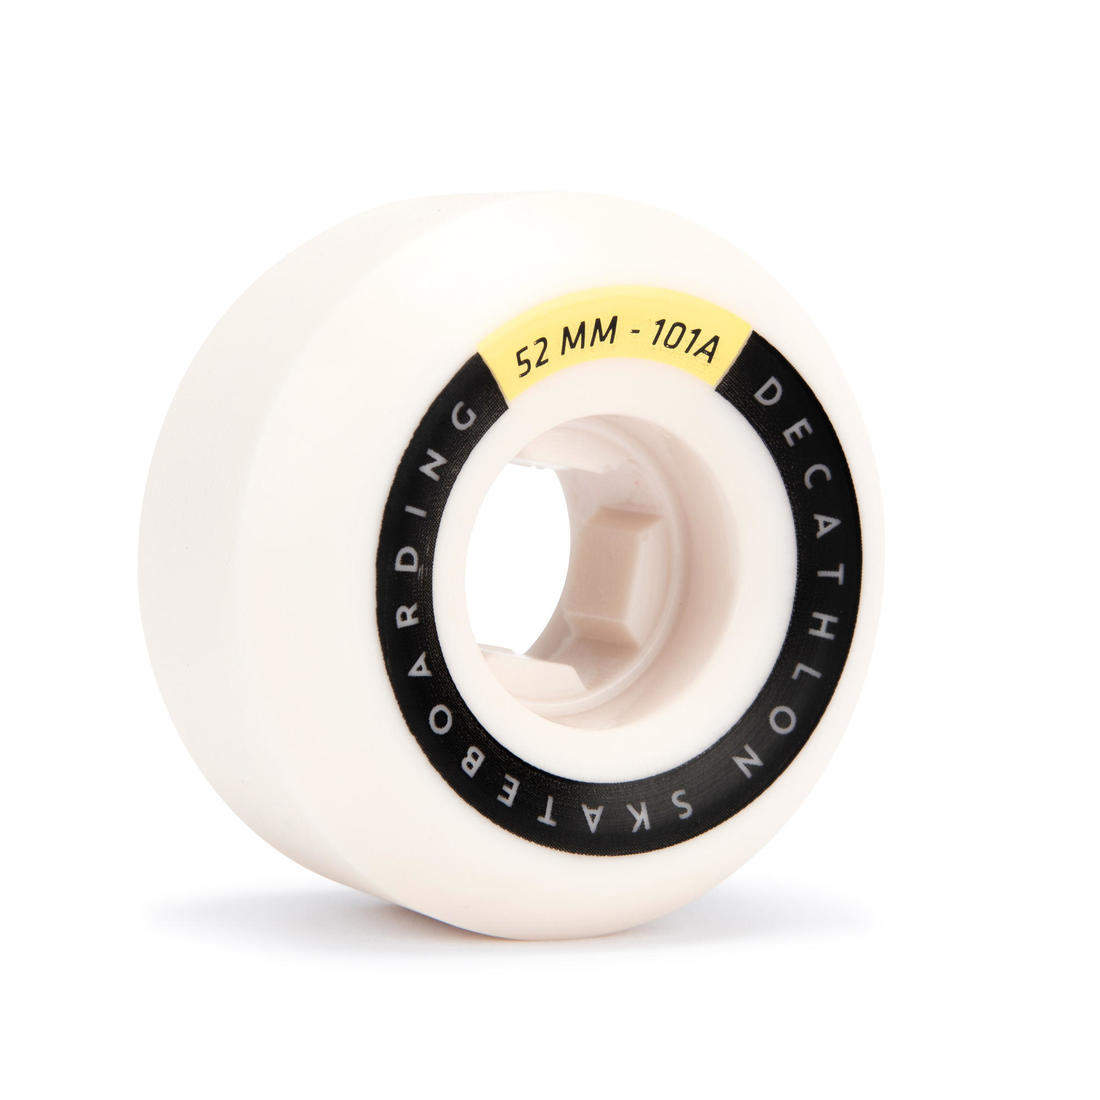 OXELO(オクセロ) スケートボード用ウィール 54mm 101A Conical 4個セット